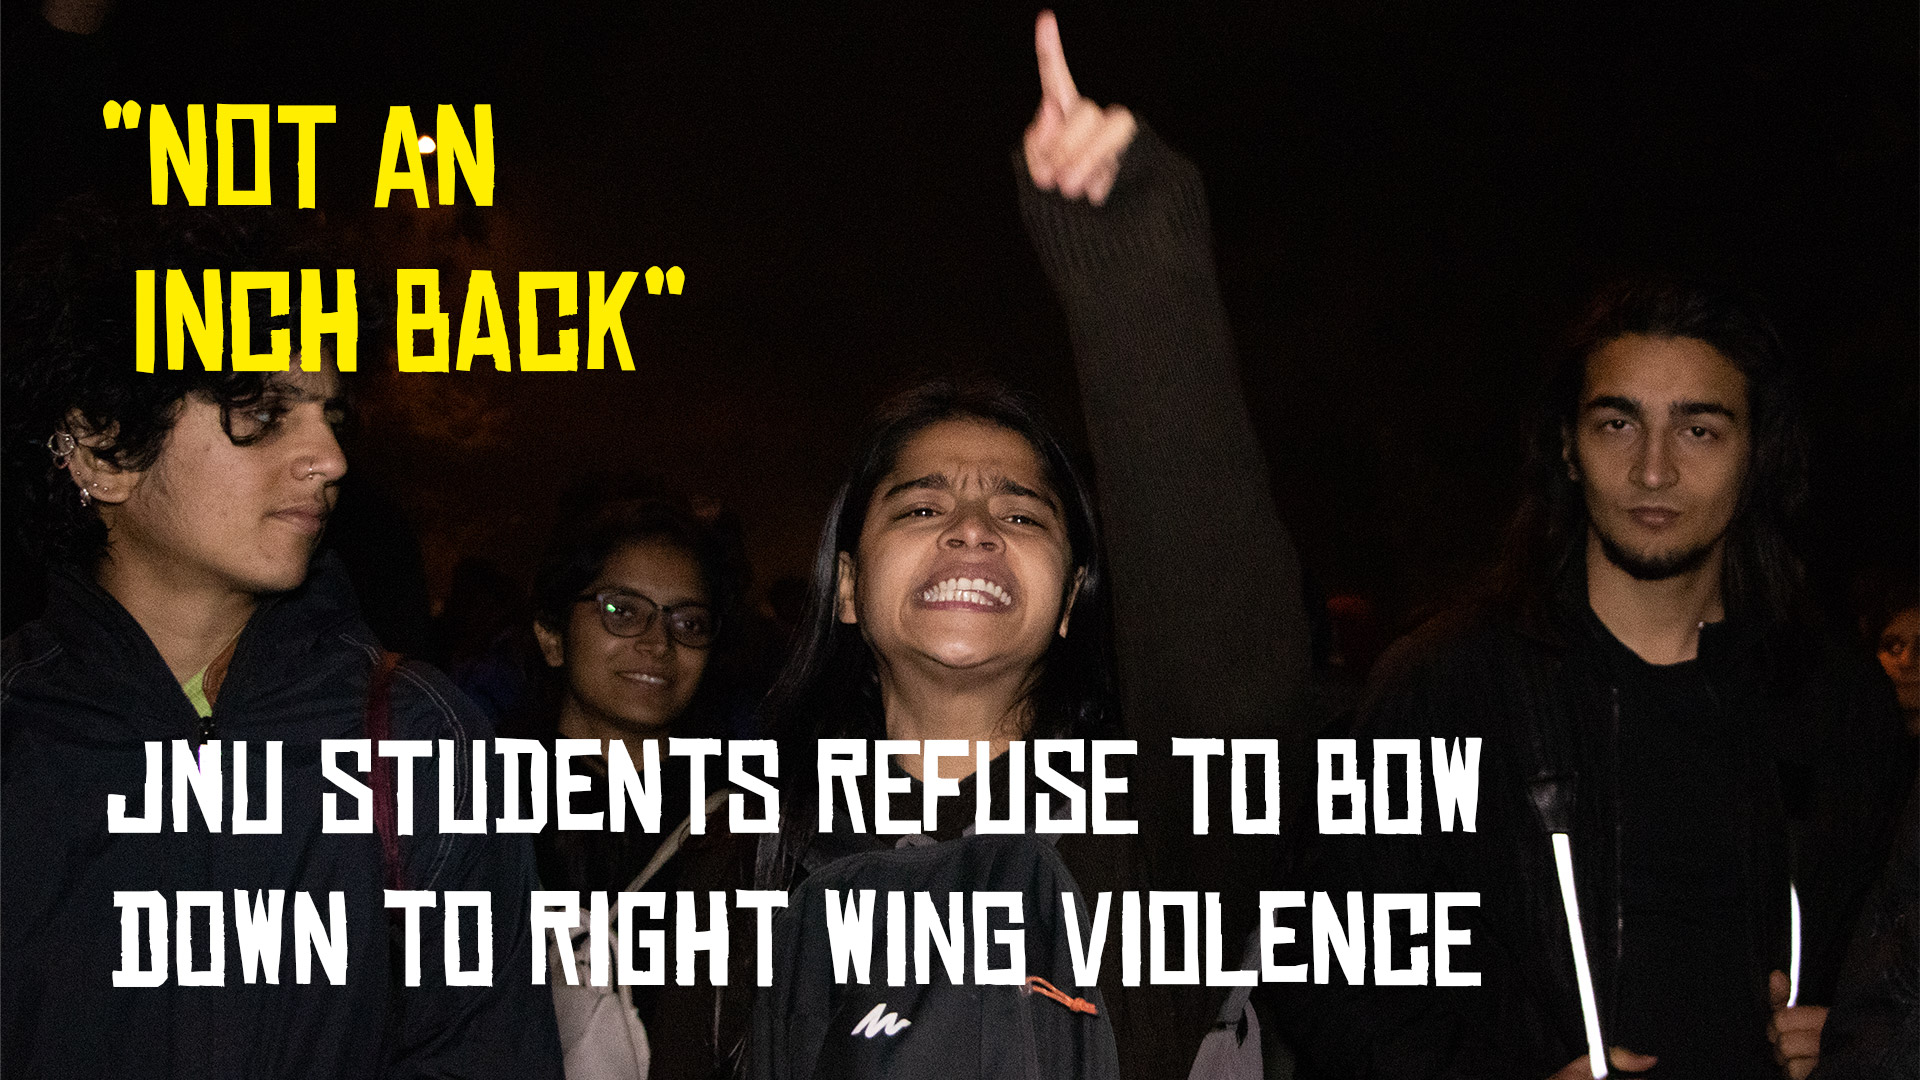 “Not an inch back”- JNU students refuse to bow down to right wing violence